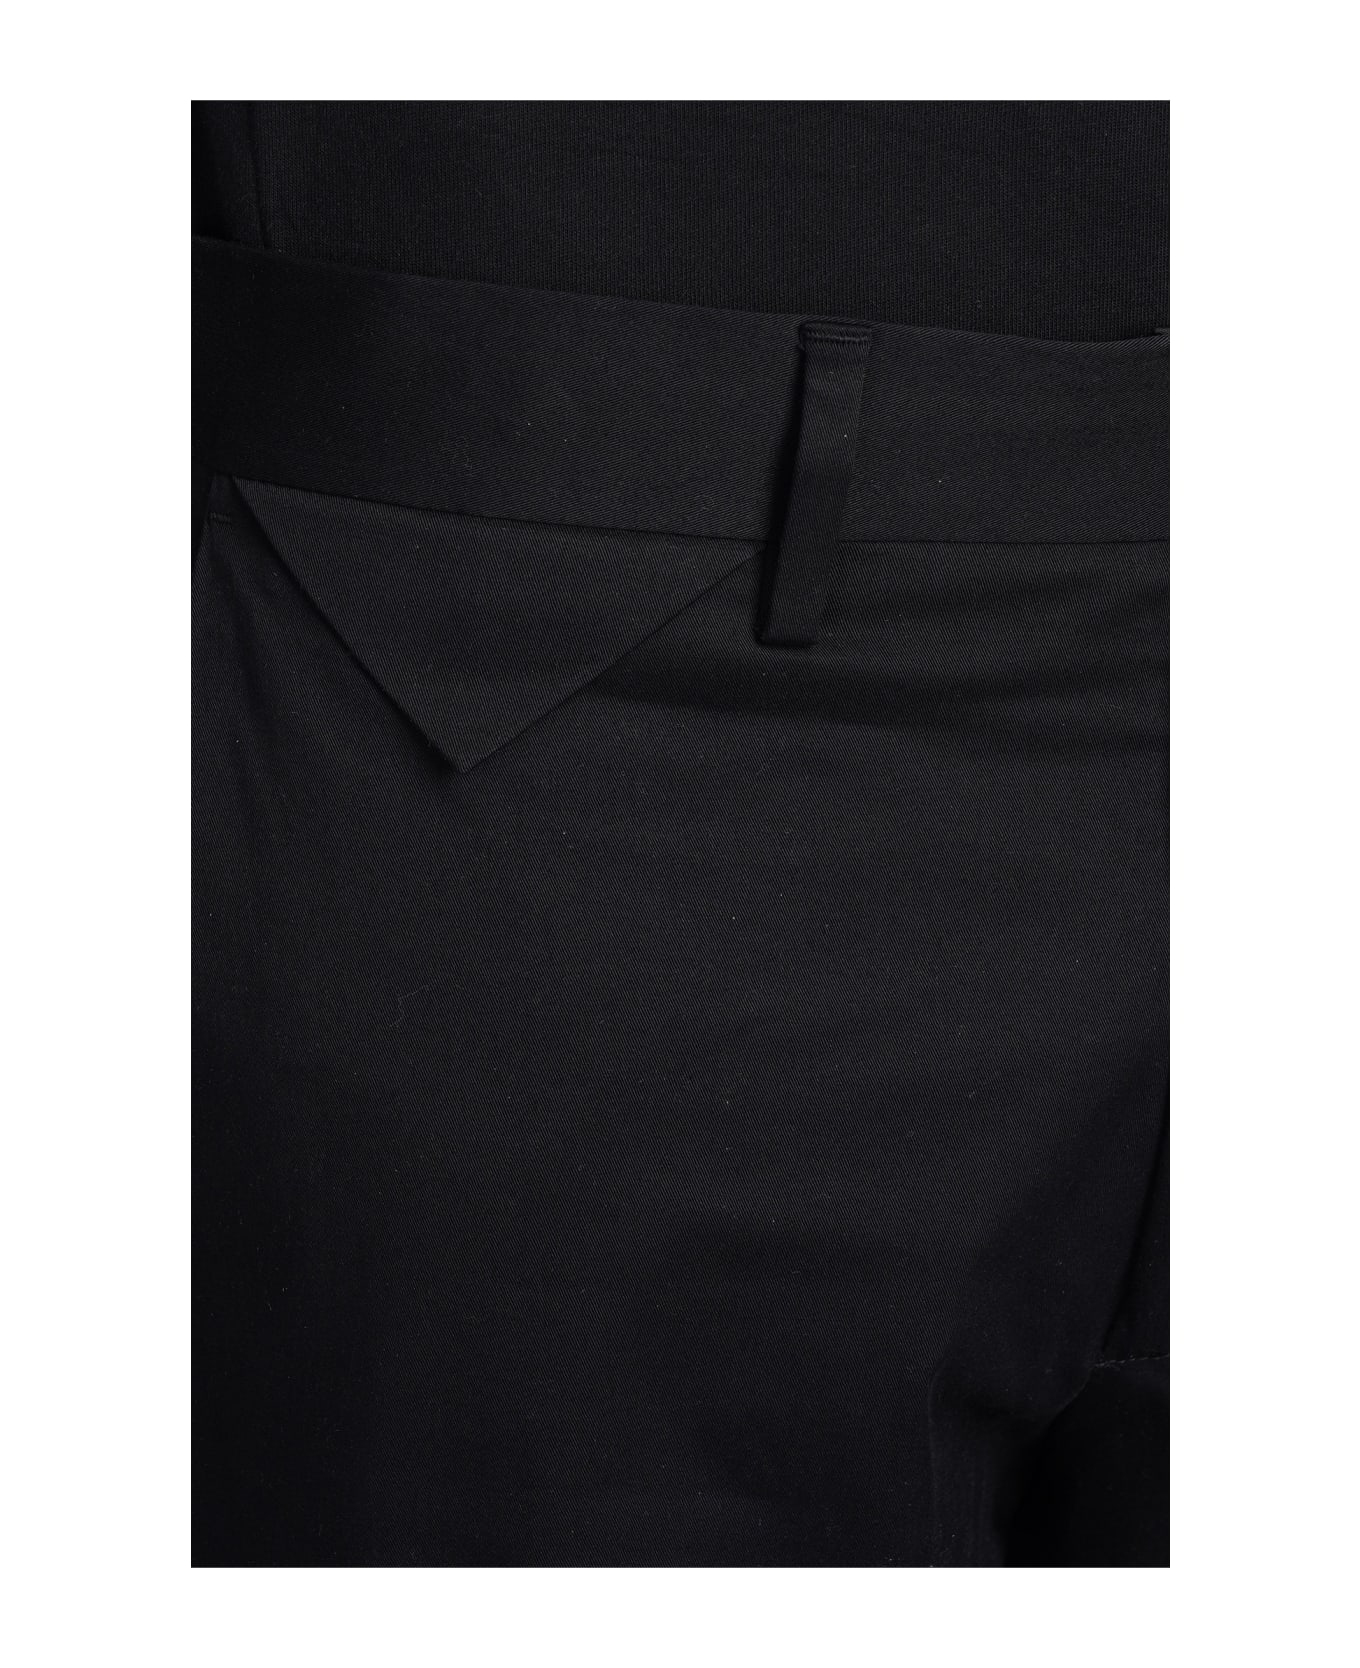 Low Brand Cooper T1.7 Pants In Black Cotton - black ボトムス